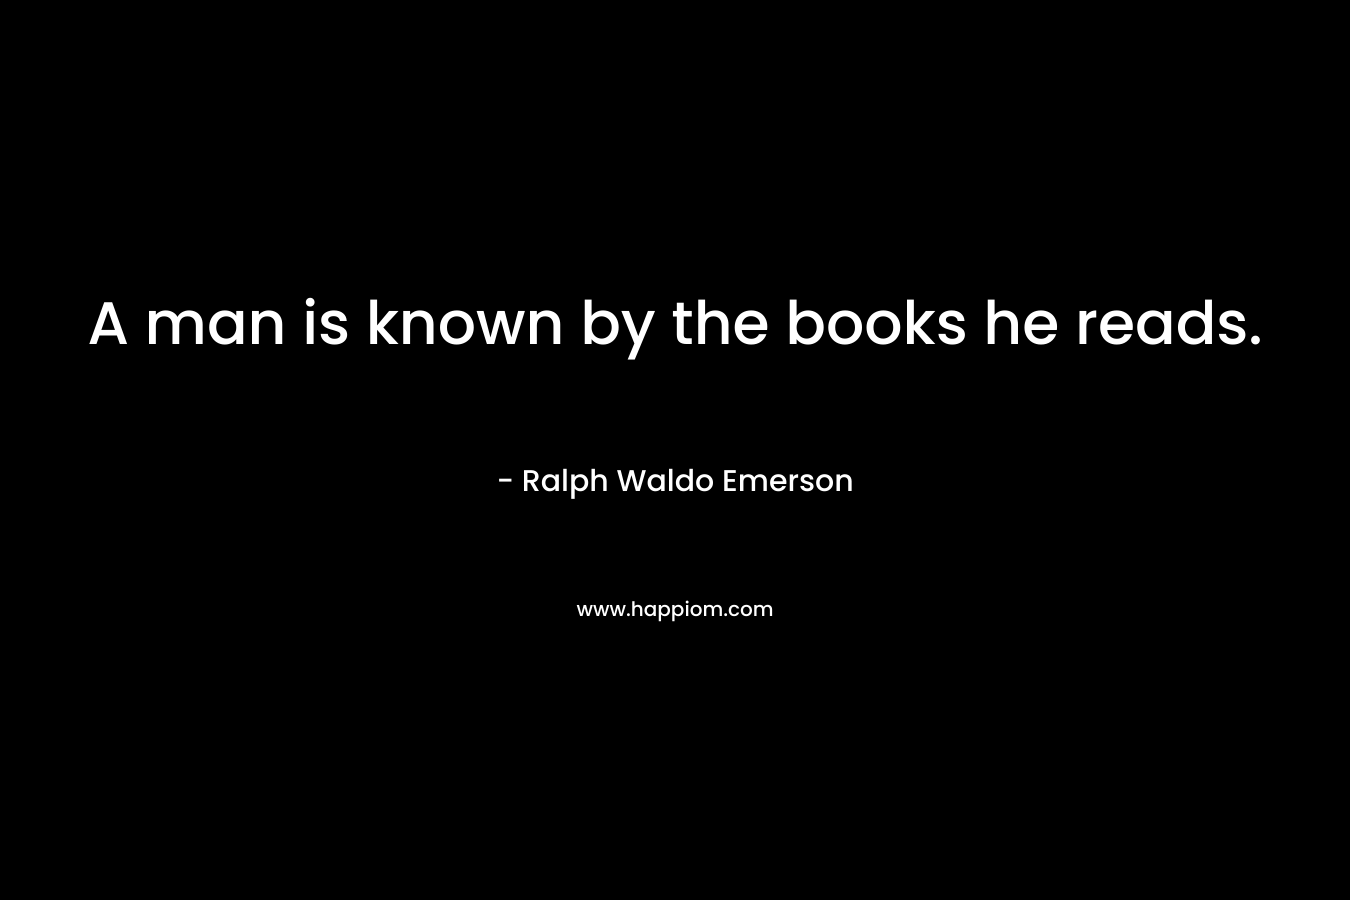 A man is known by the books he reads. – Ralph Waldo Emerson